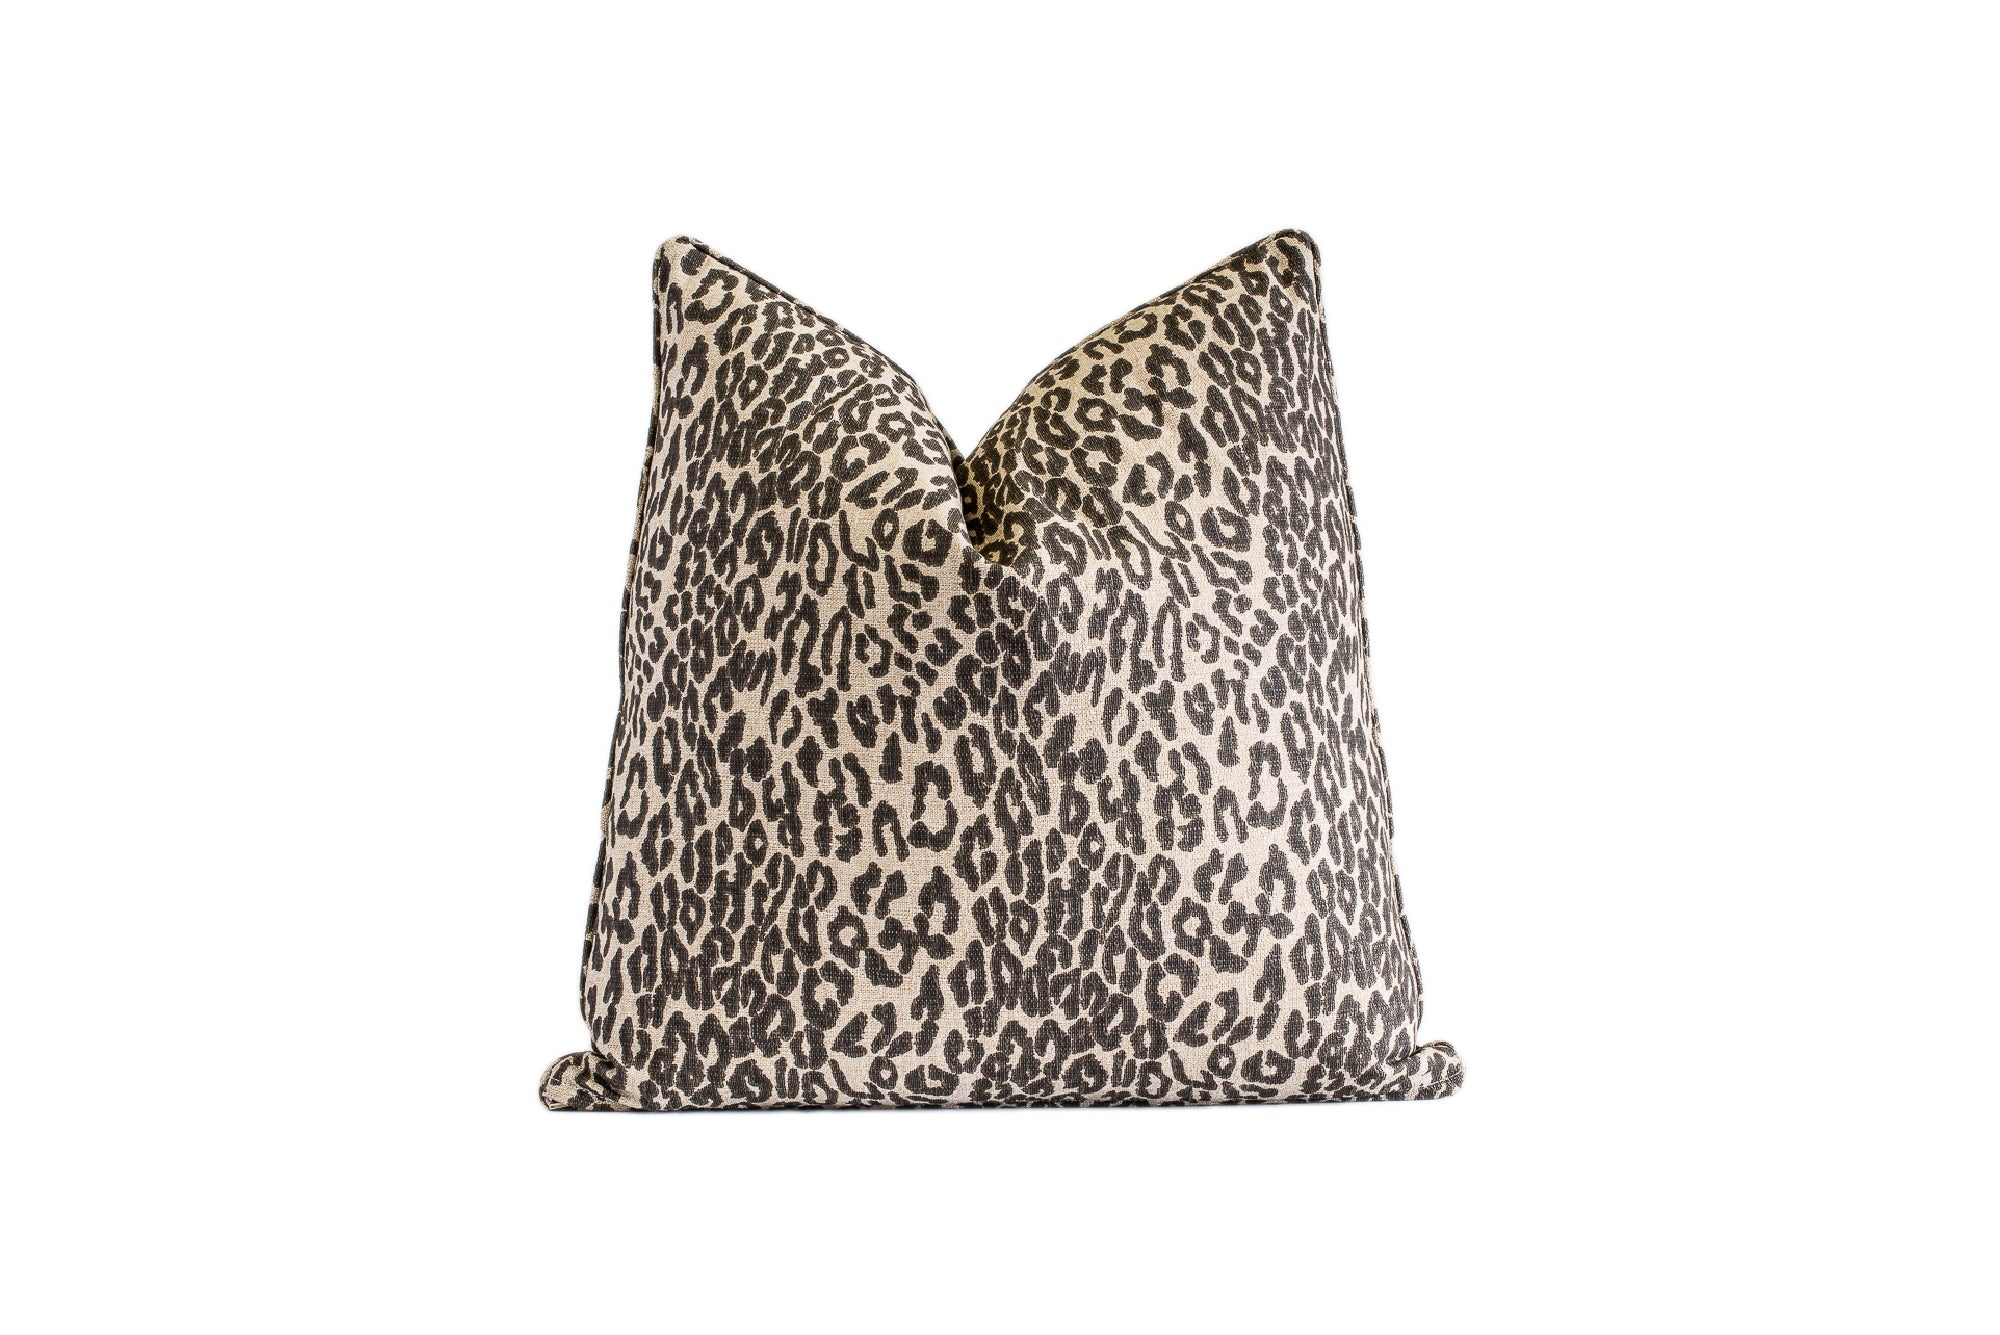 Taupe Velvet Animal Print and Embroidered Pillow